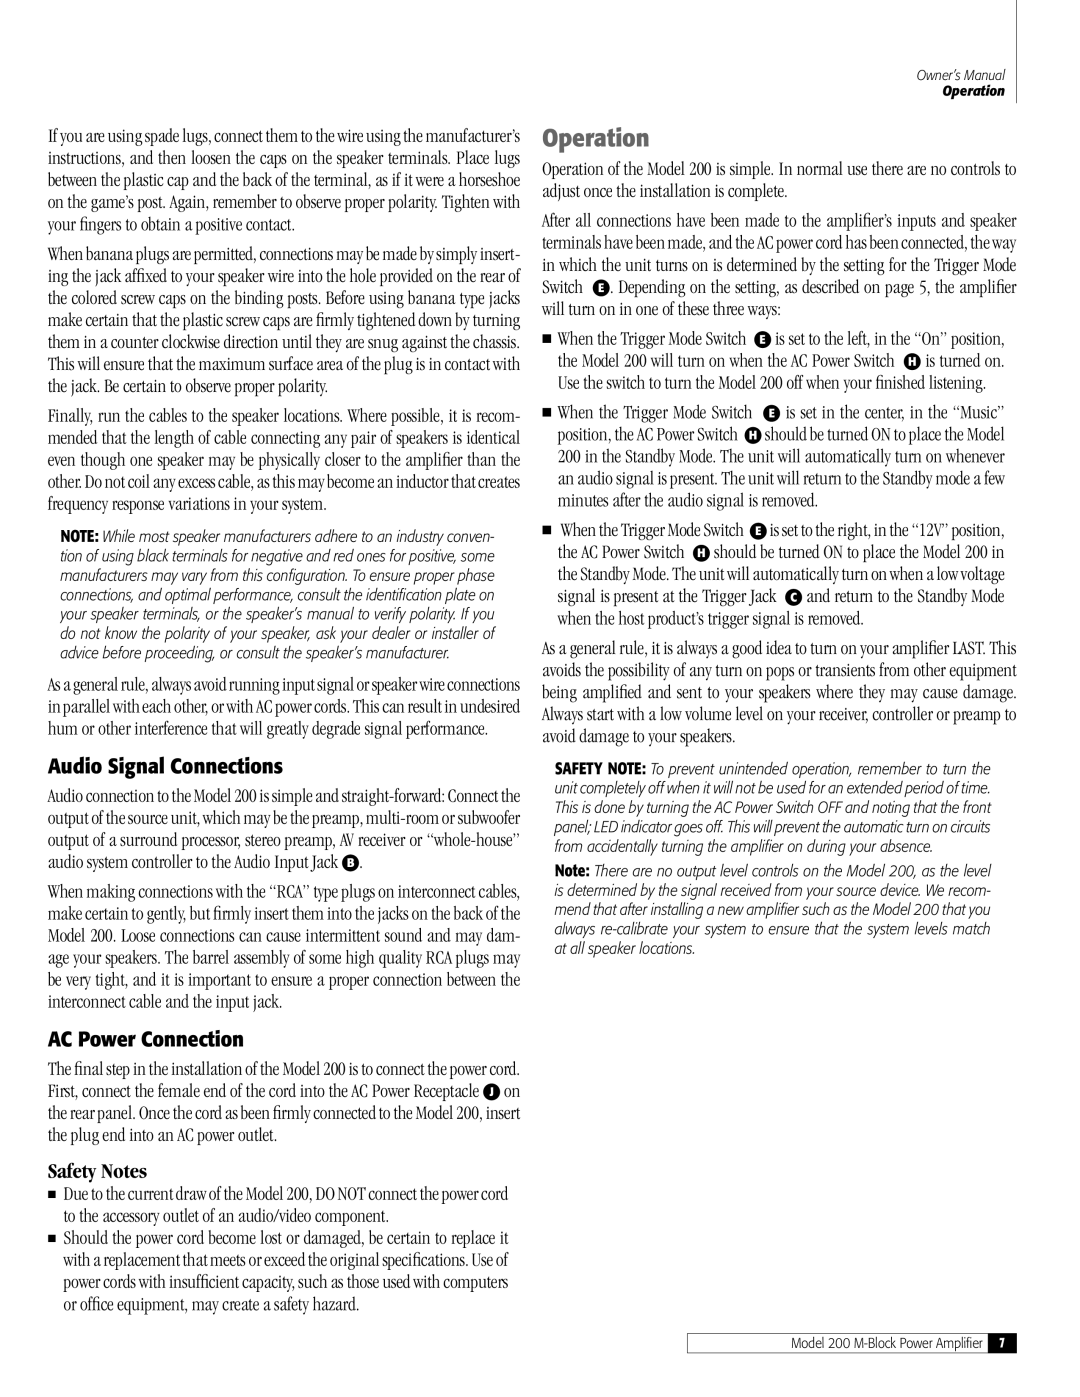 Outlaw Audio 200 M-Block owner manual Operation, Audio Signal Connections, AC Power Connection, Safety Notes 